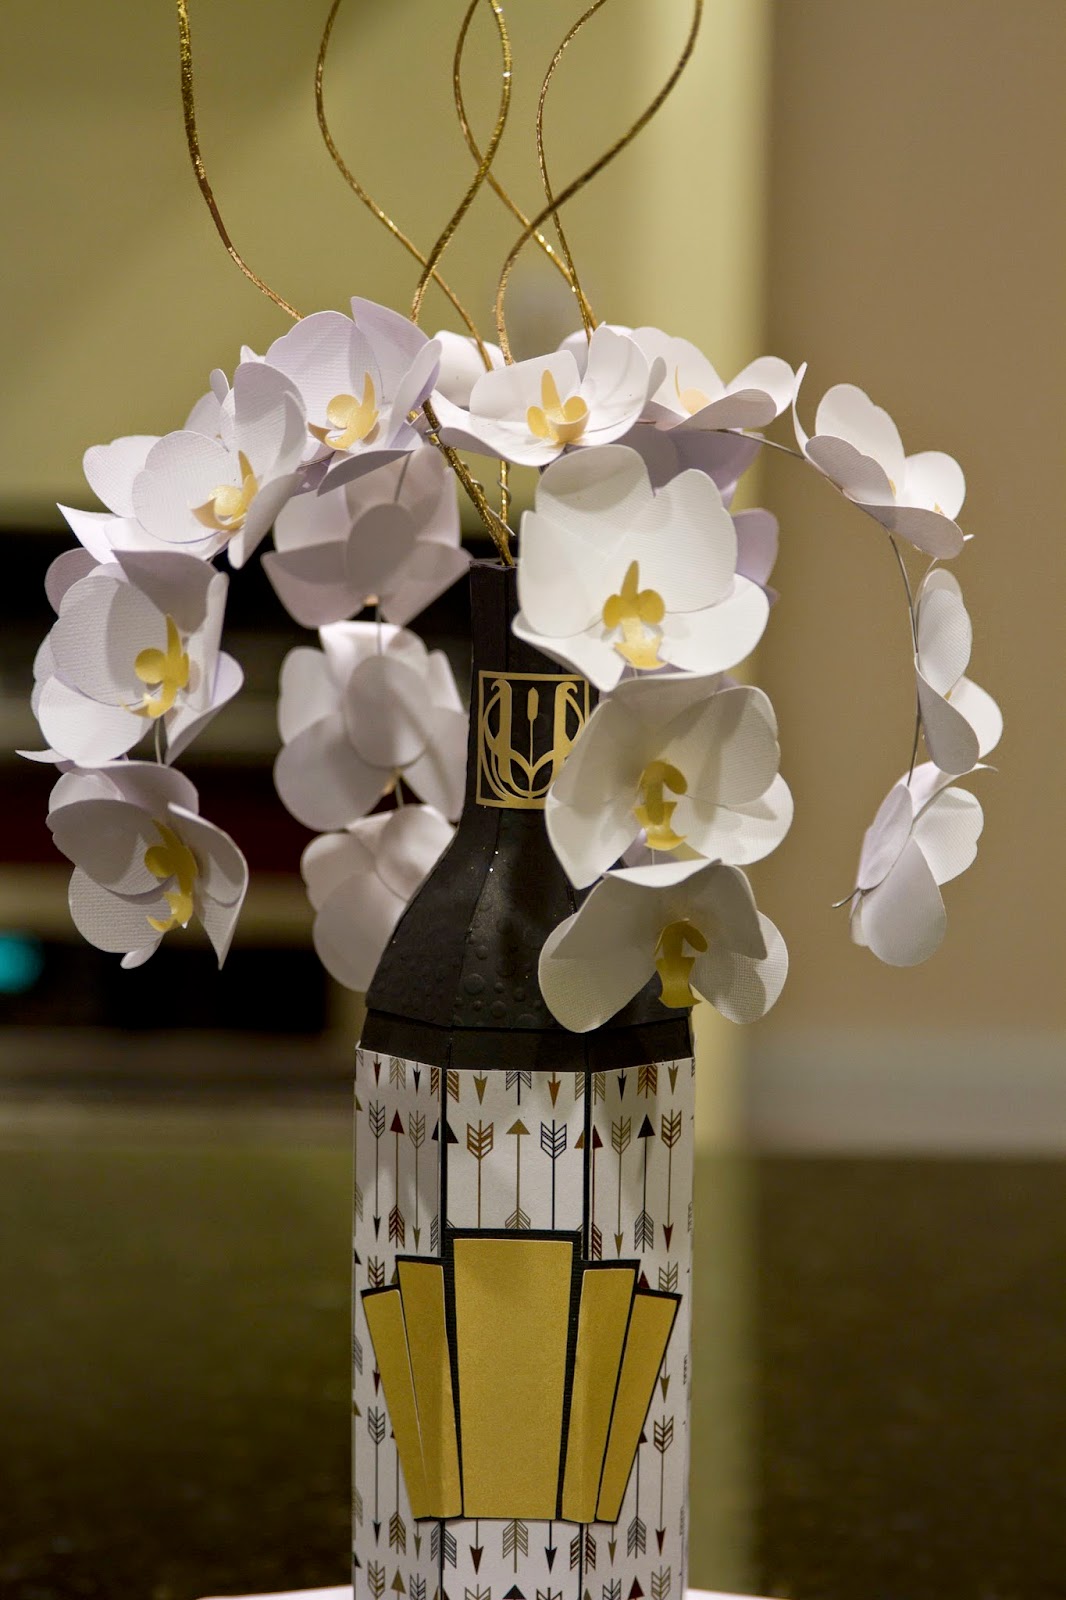 paper champagne bottle with orchids casading out of the top standing on top of large dice